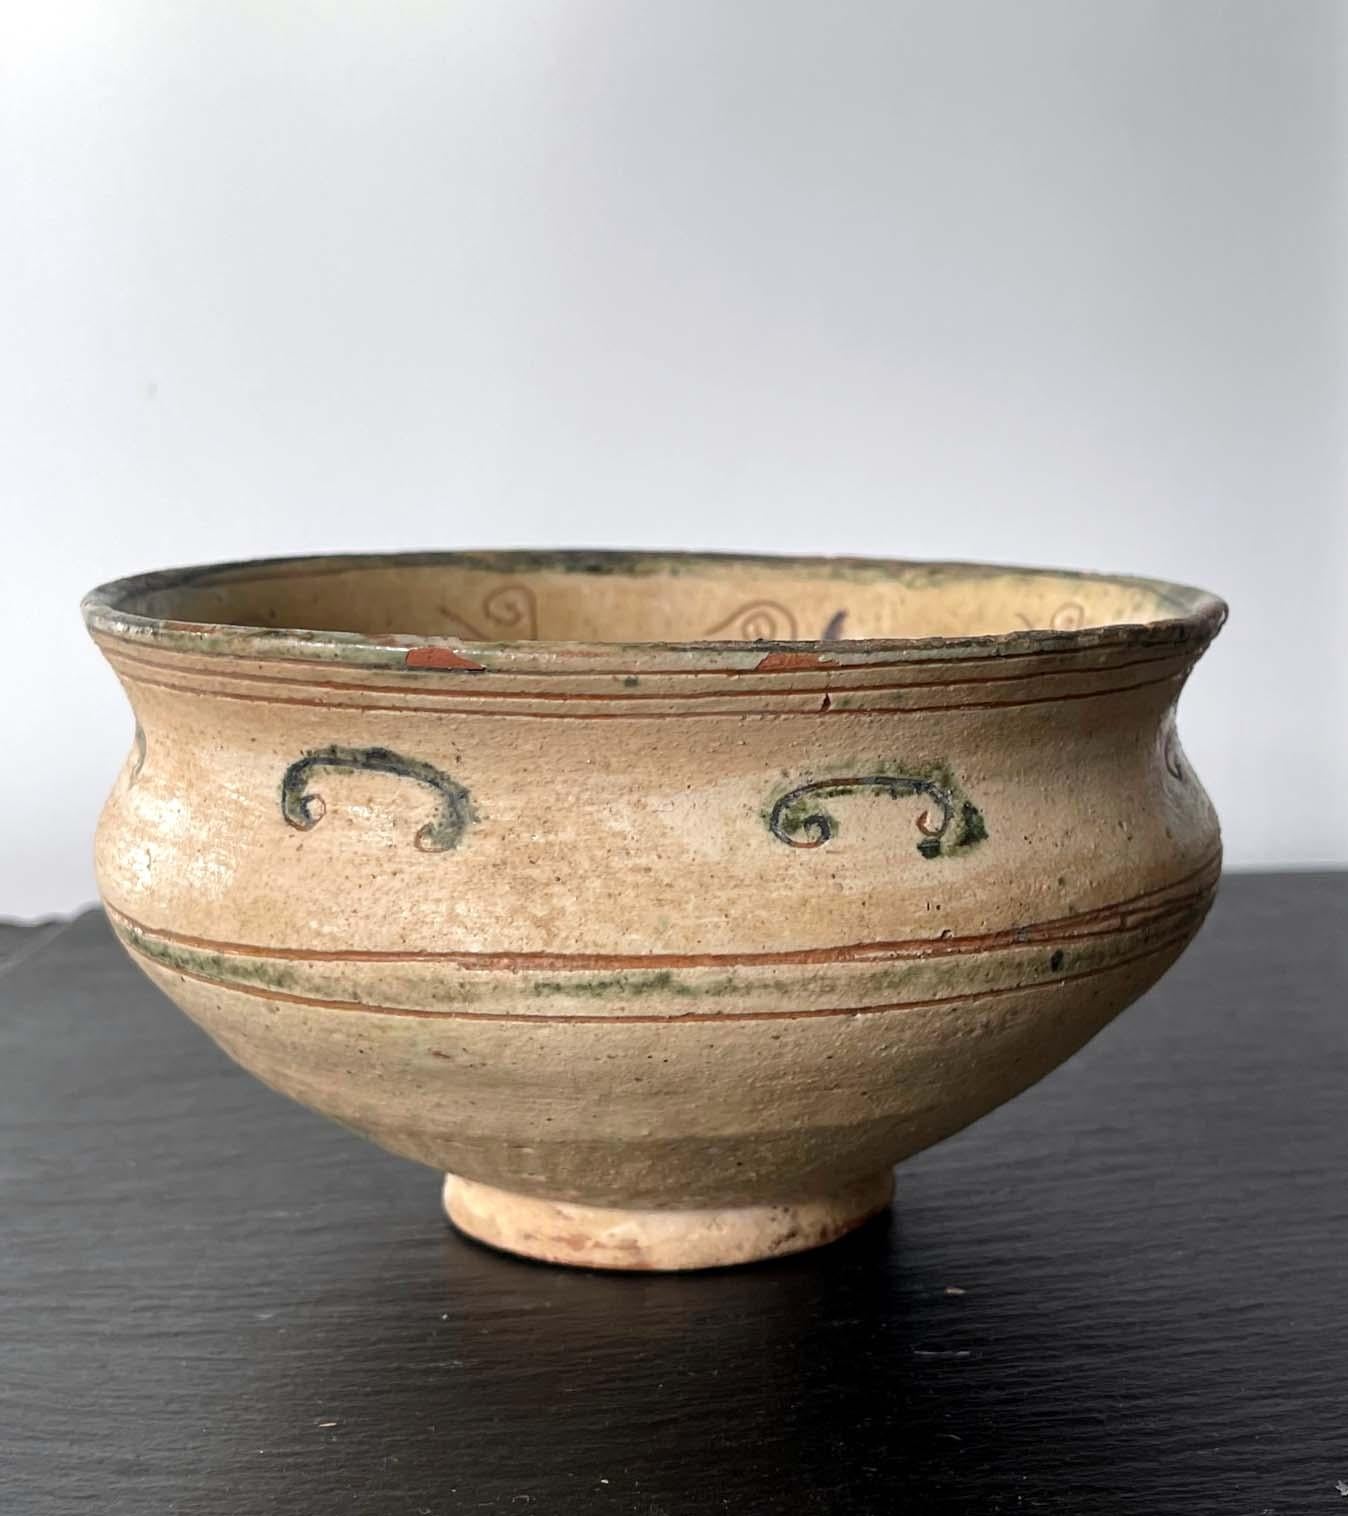 A small Islamic ceramic bowl circa 11-12th century, possibly from Nishapur or Aghkand area of Persia. The elegantly shaped bowl with a slightly flared opening is supported on a small foot rim. The earth ware body of the bowl was made of a red clay,